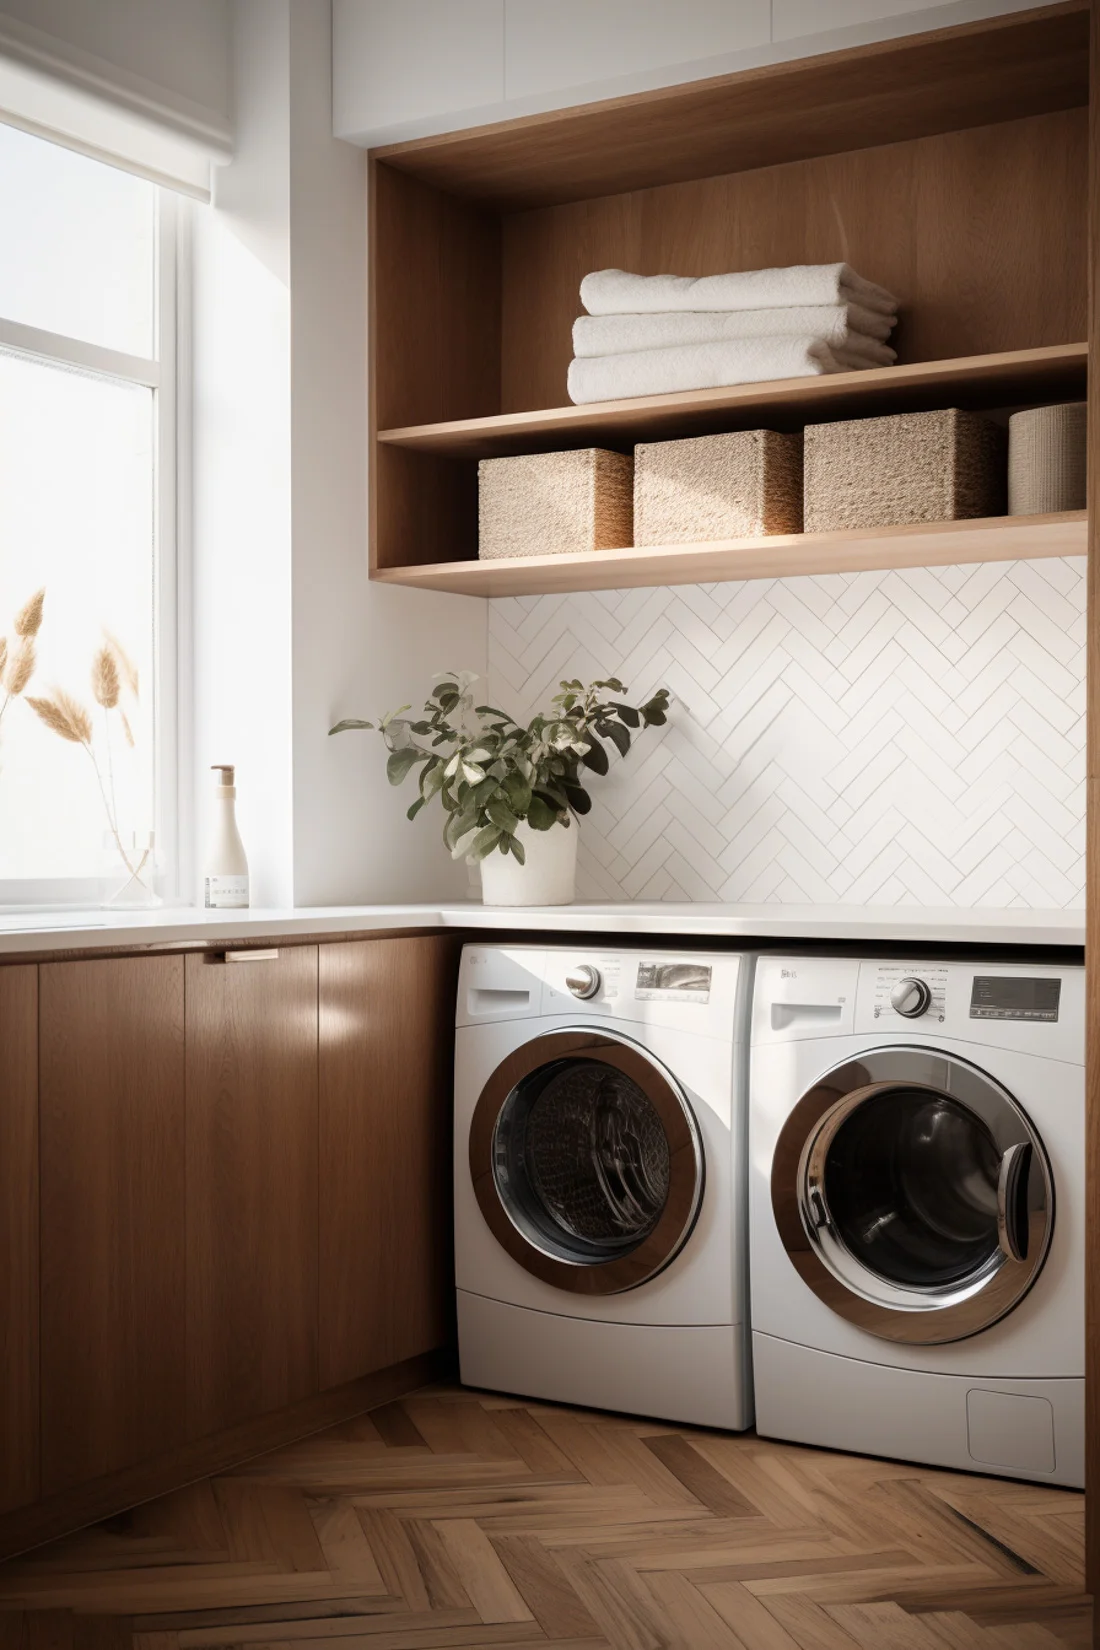 white and wood laundry room, modern and sleek with washer and dryer, white tile backsplash in herringbone pattern, and open wood shelves above with towels and laundry baskets